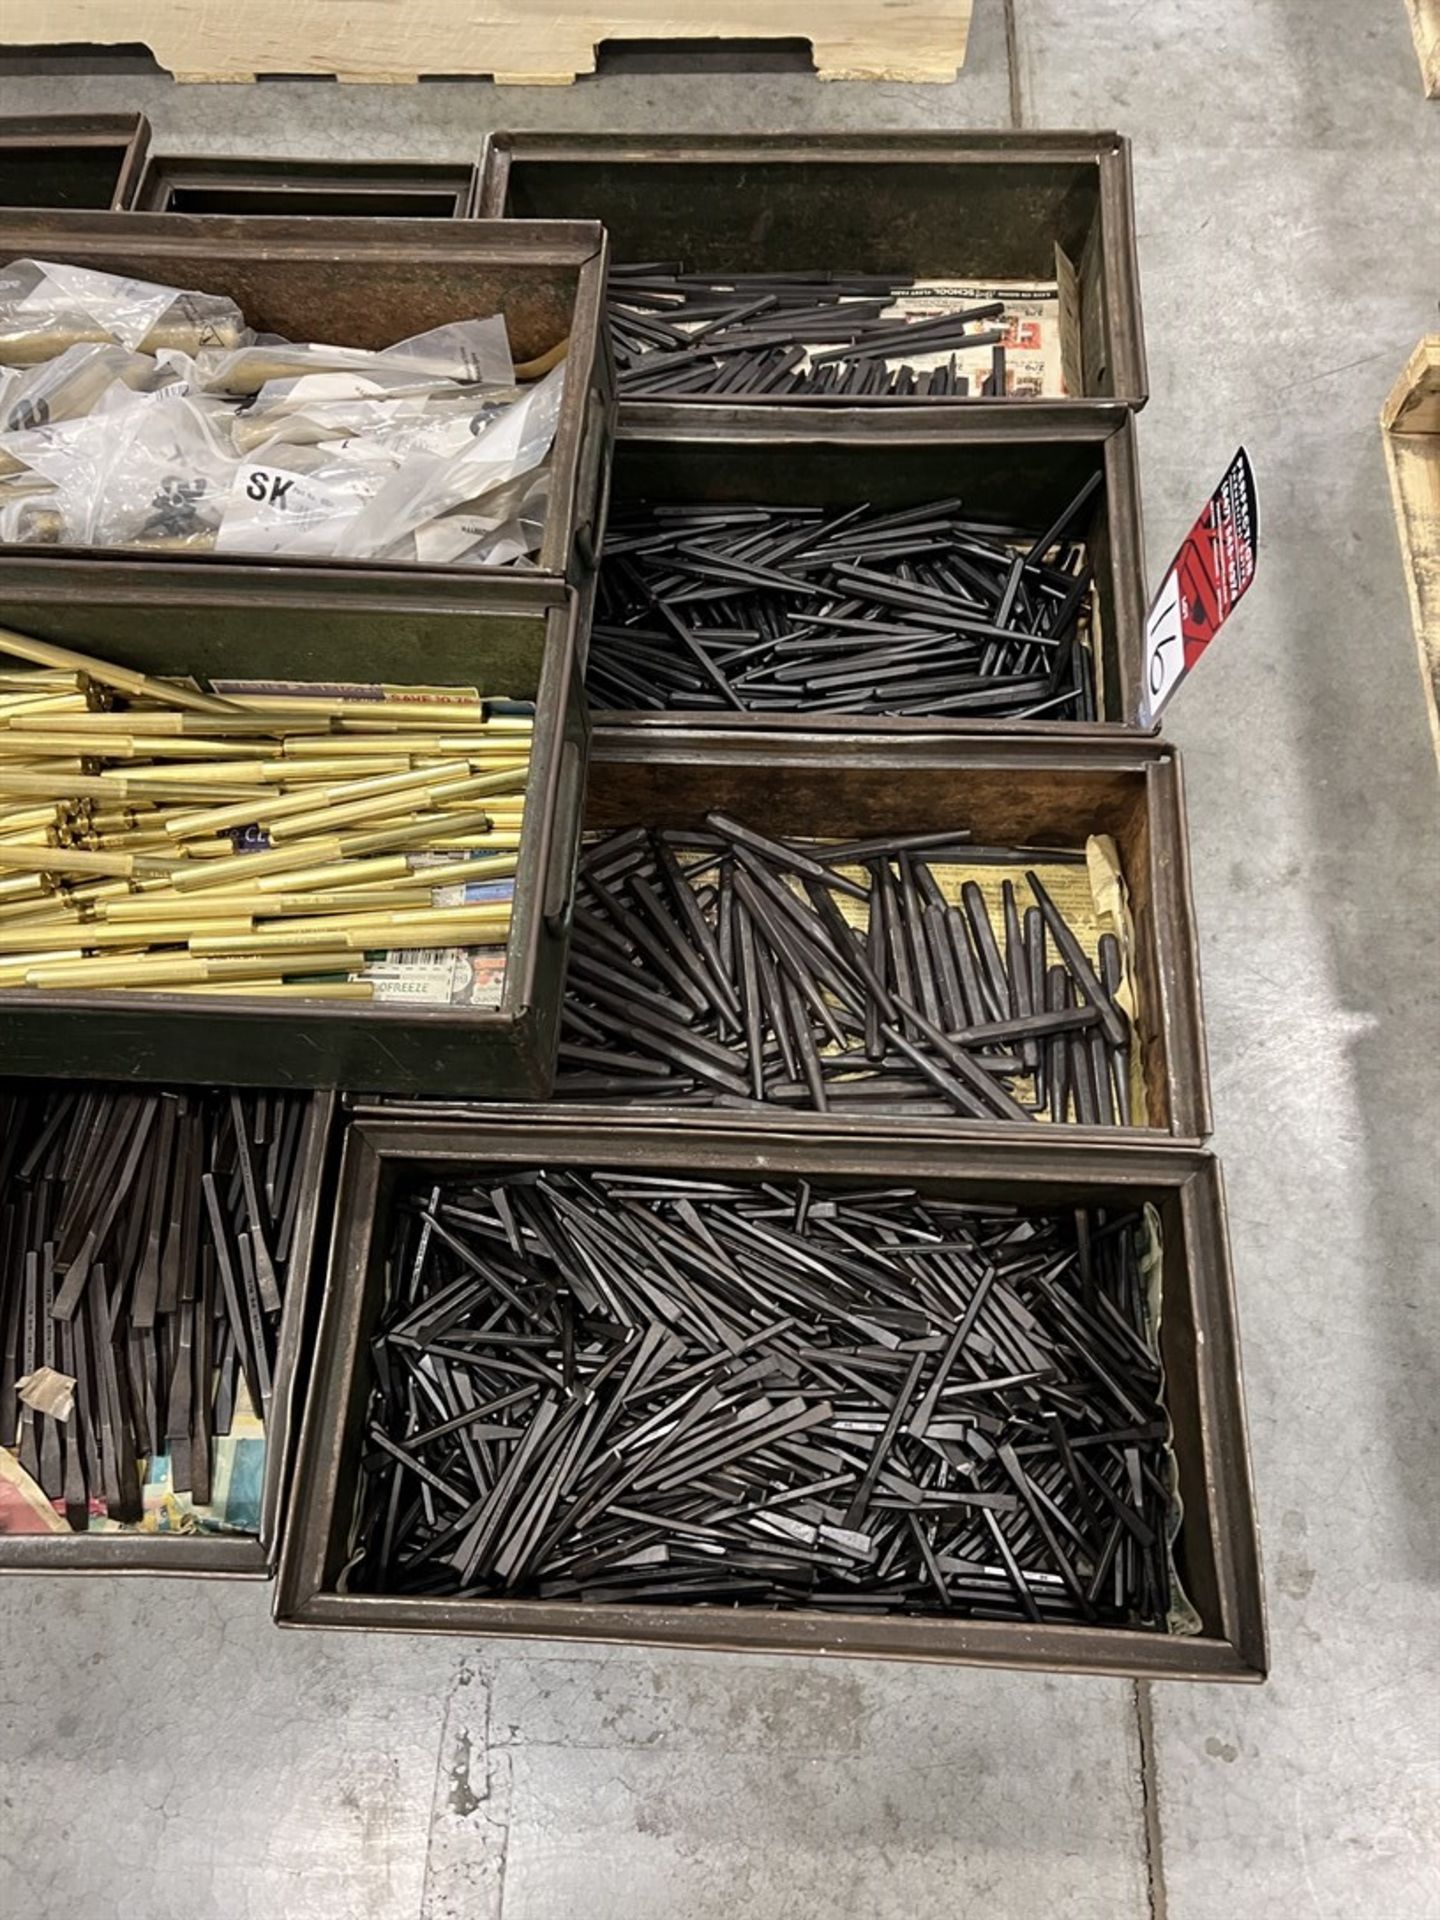 Pallet of Assorted Punches and Chisels - Image 4 of 4